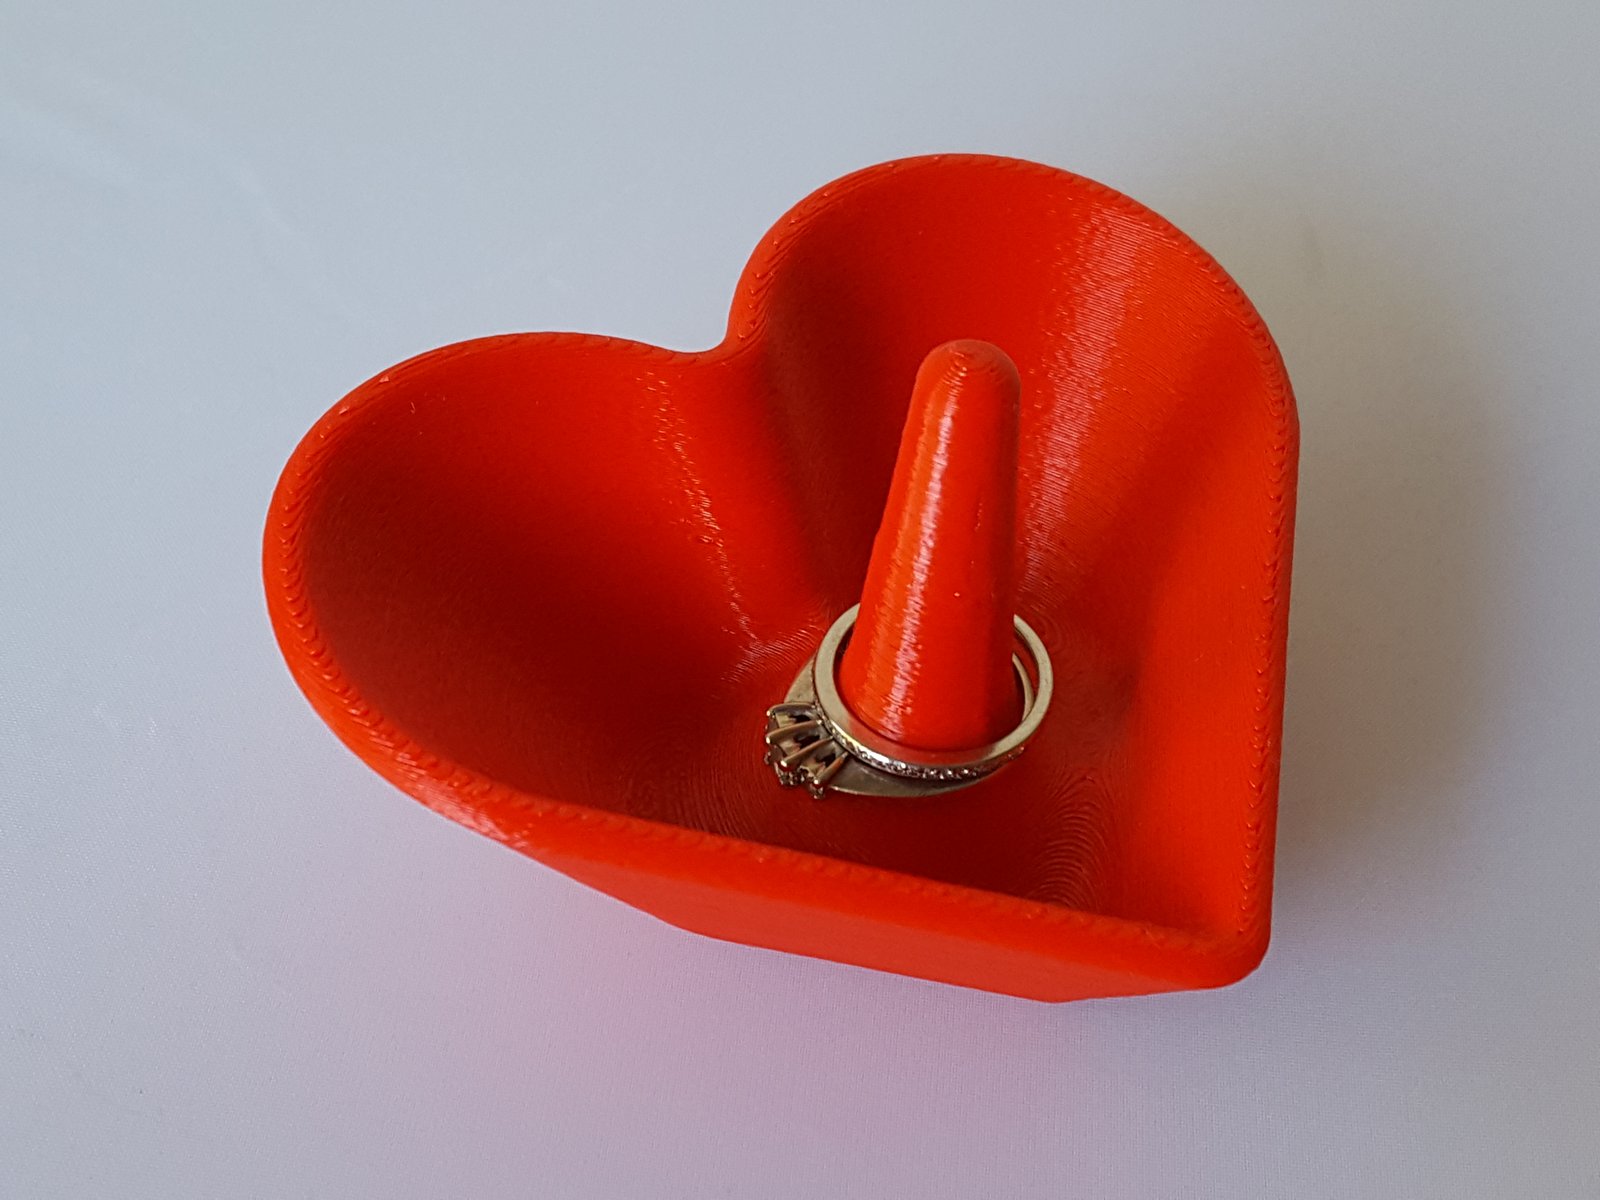 Details about   Cute Heart Toothbrush HolderLove HeartFast Shipping ! 3D Printed 